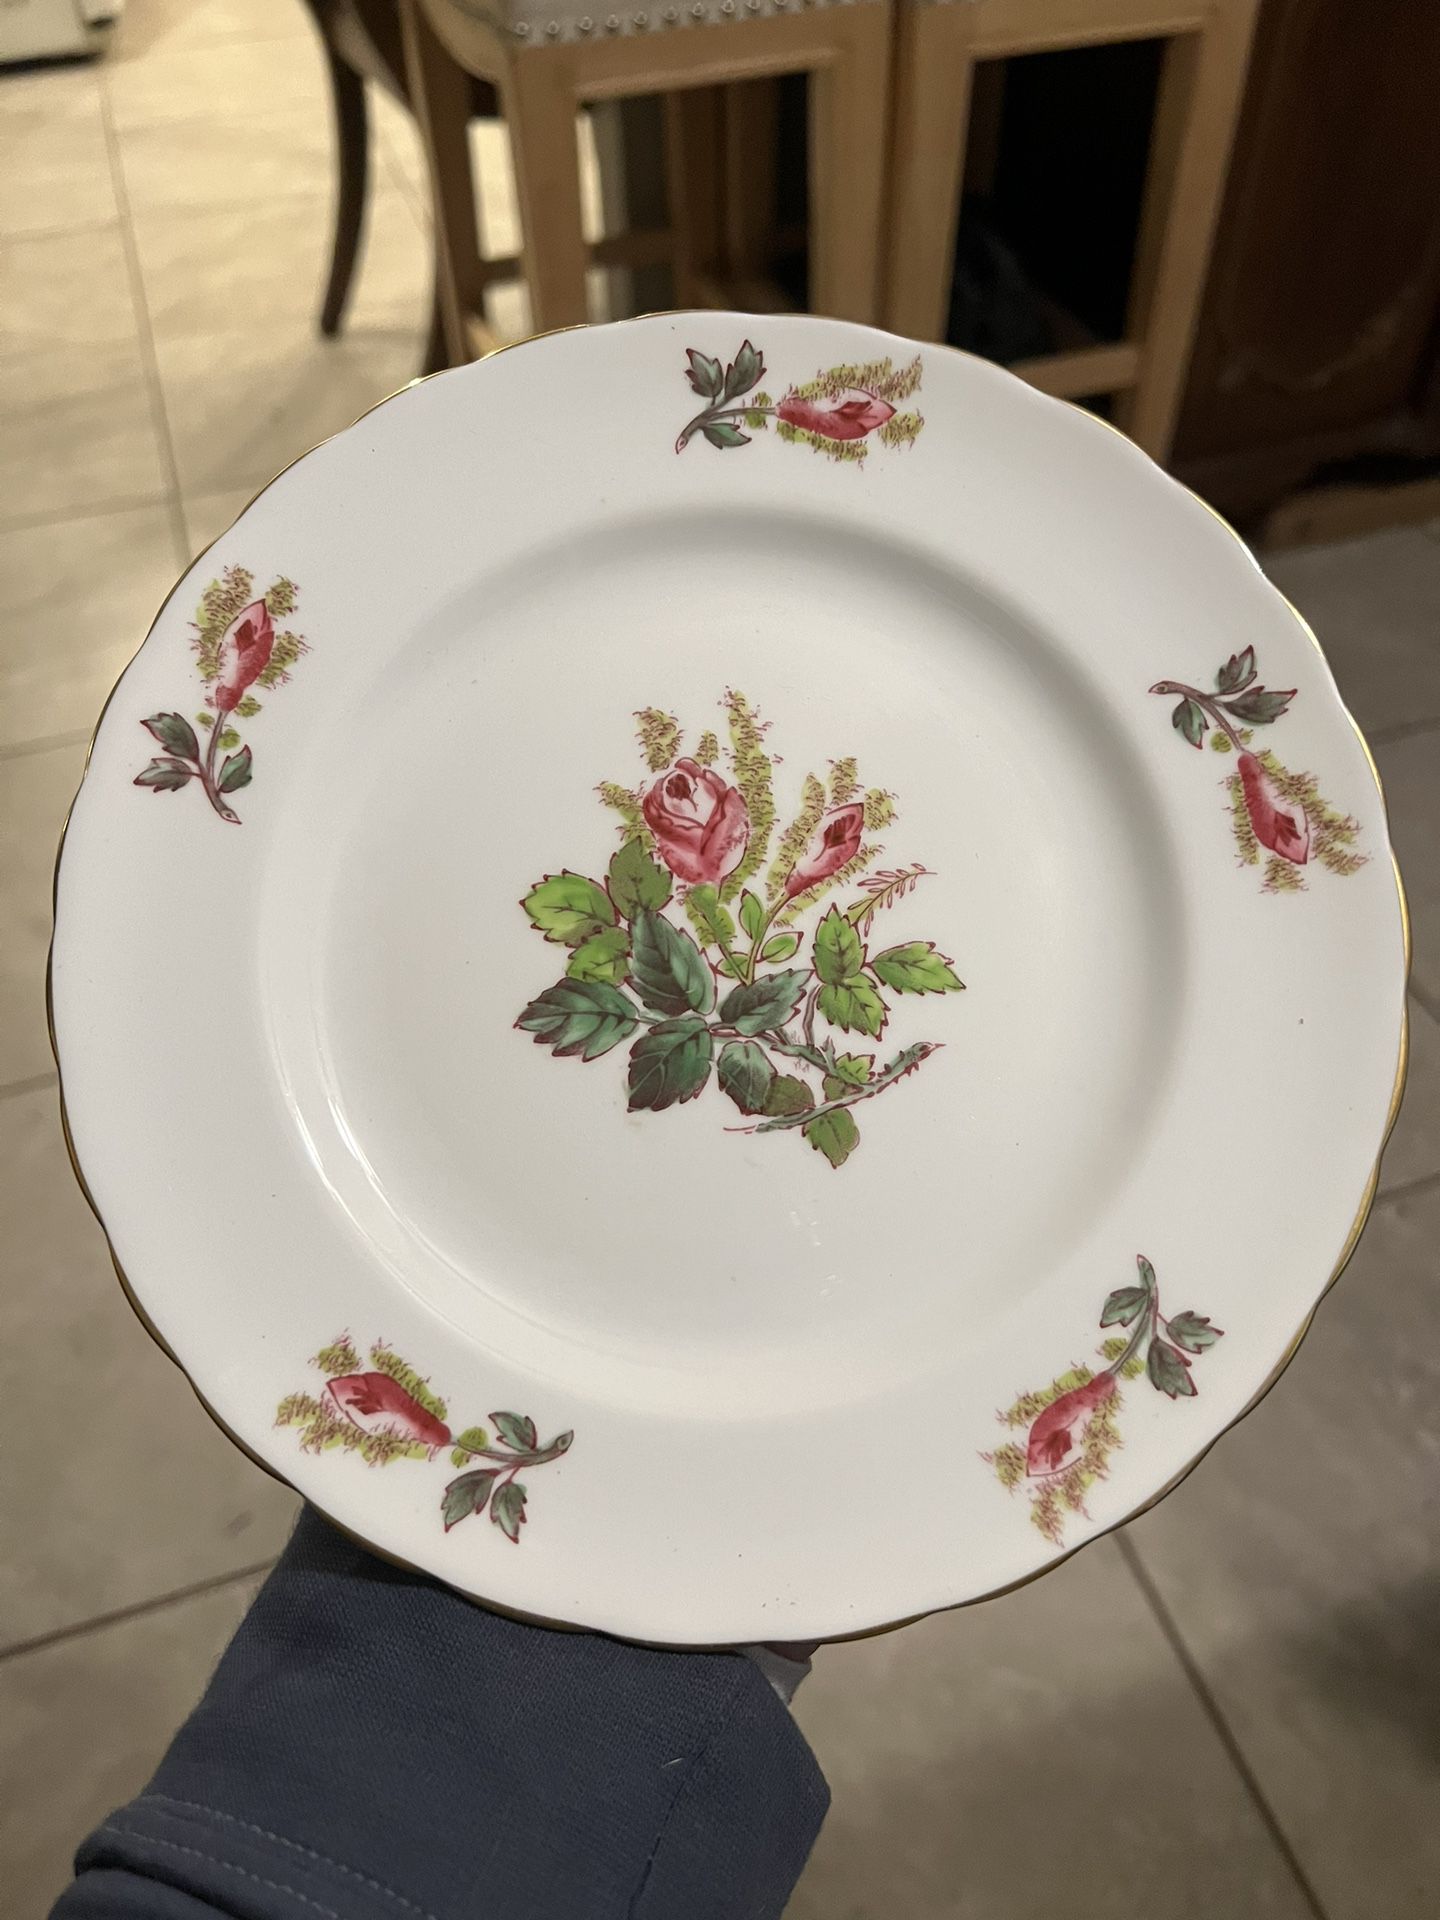 Moss Rose Royal Chelsea Plate 8" Made in England Fine Bone China